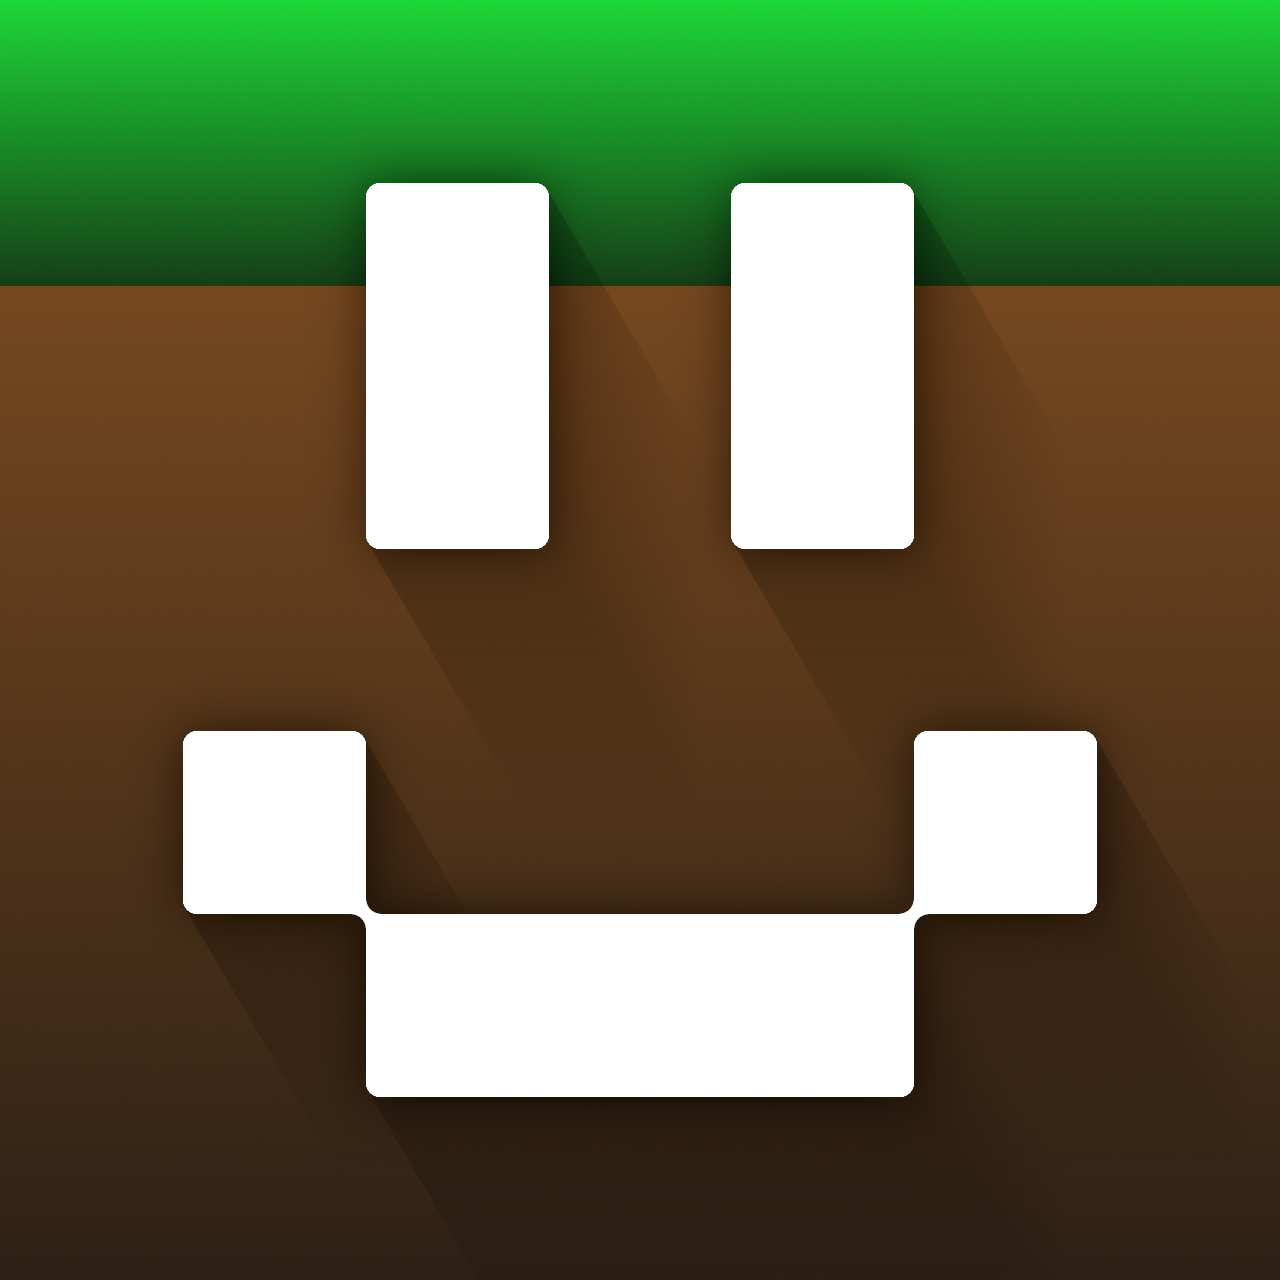 How to Make a Minecraft Server Icon